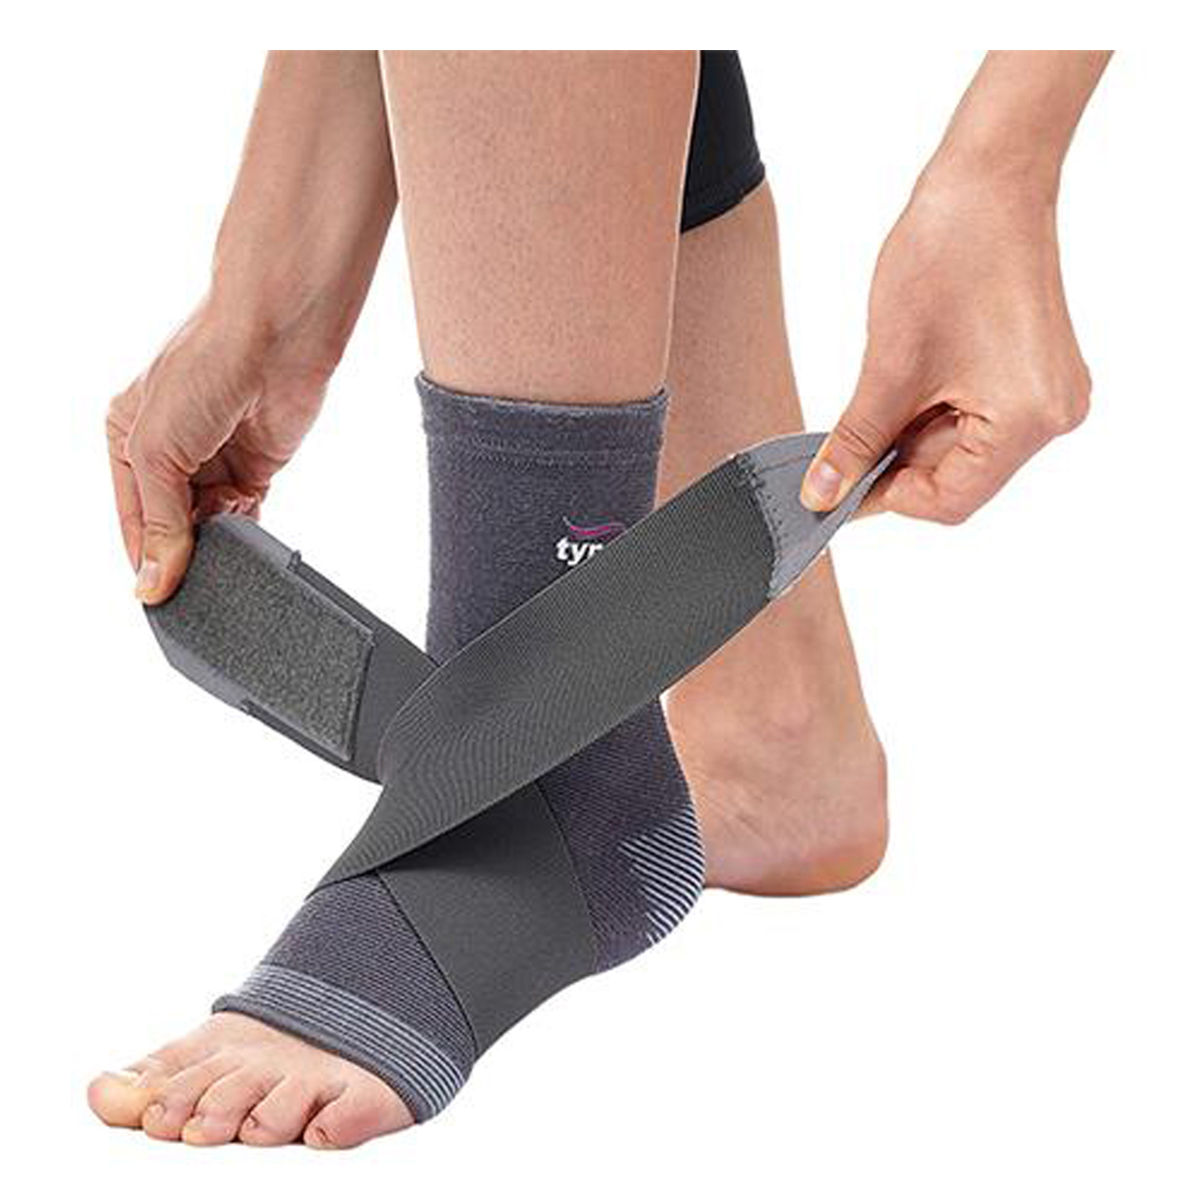 Buy Tynor Ankle Binder Single Large, 1 Count Online